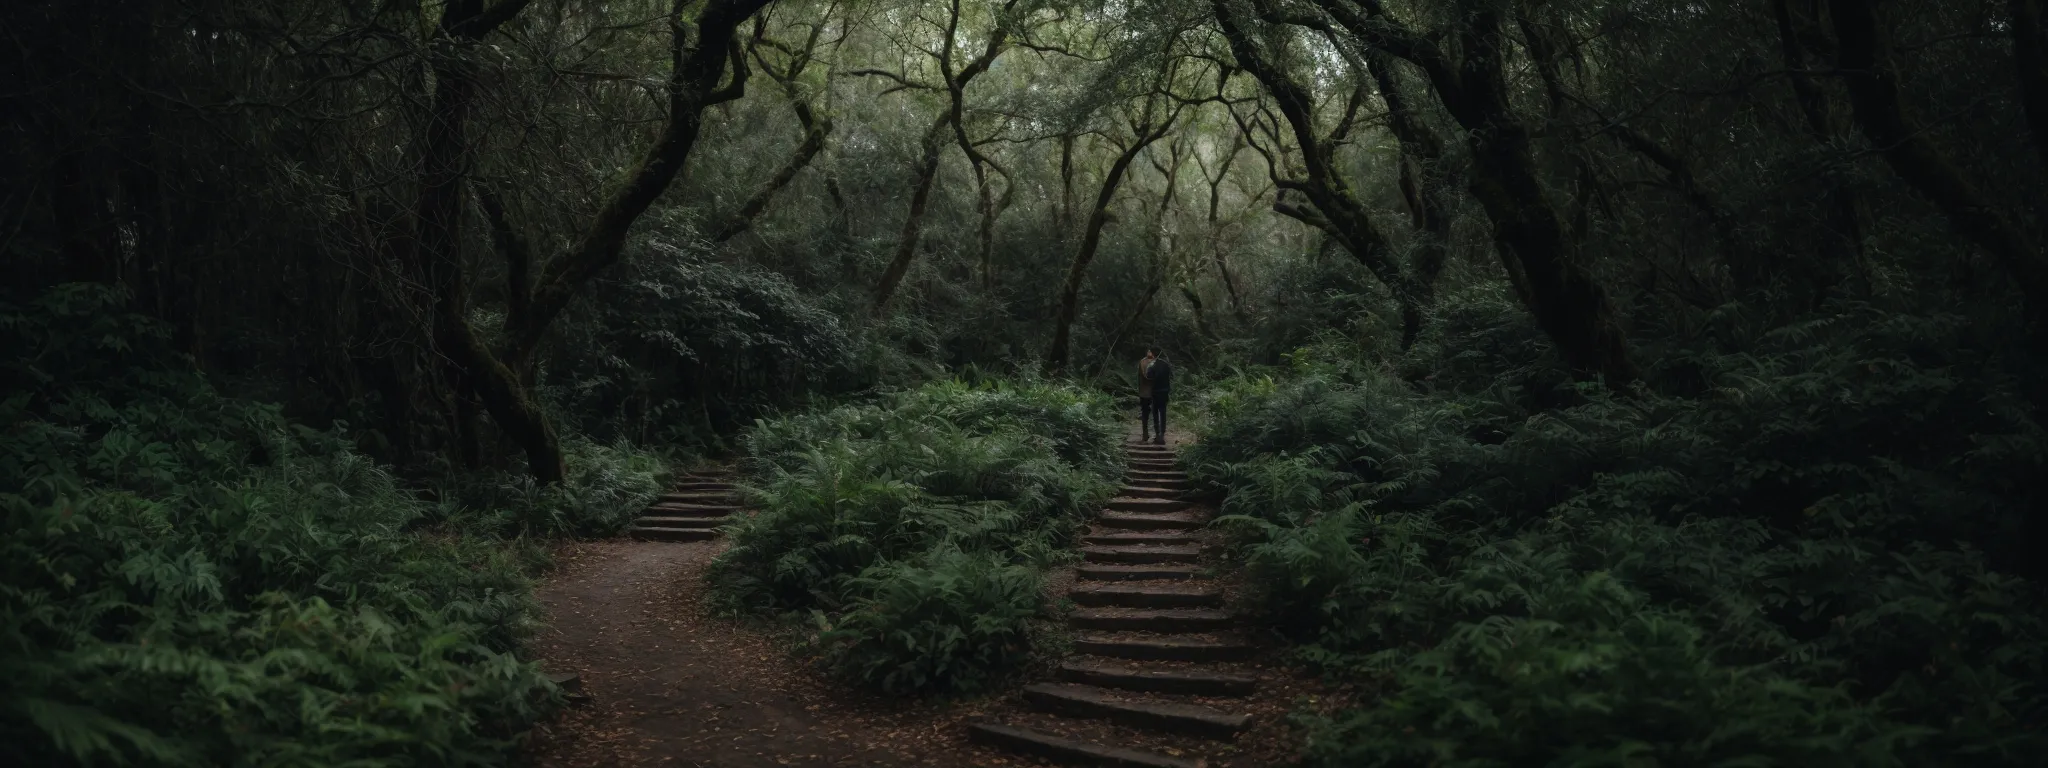 a wary individual examines a pathway divided, with one side leading through a dark, tangled forest and the other along a well-lit, serene garden.